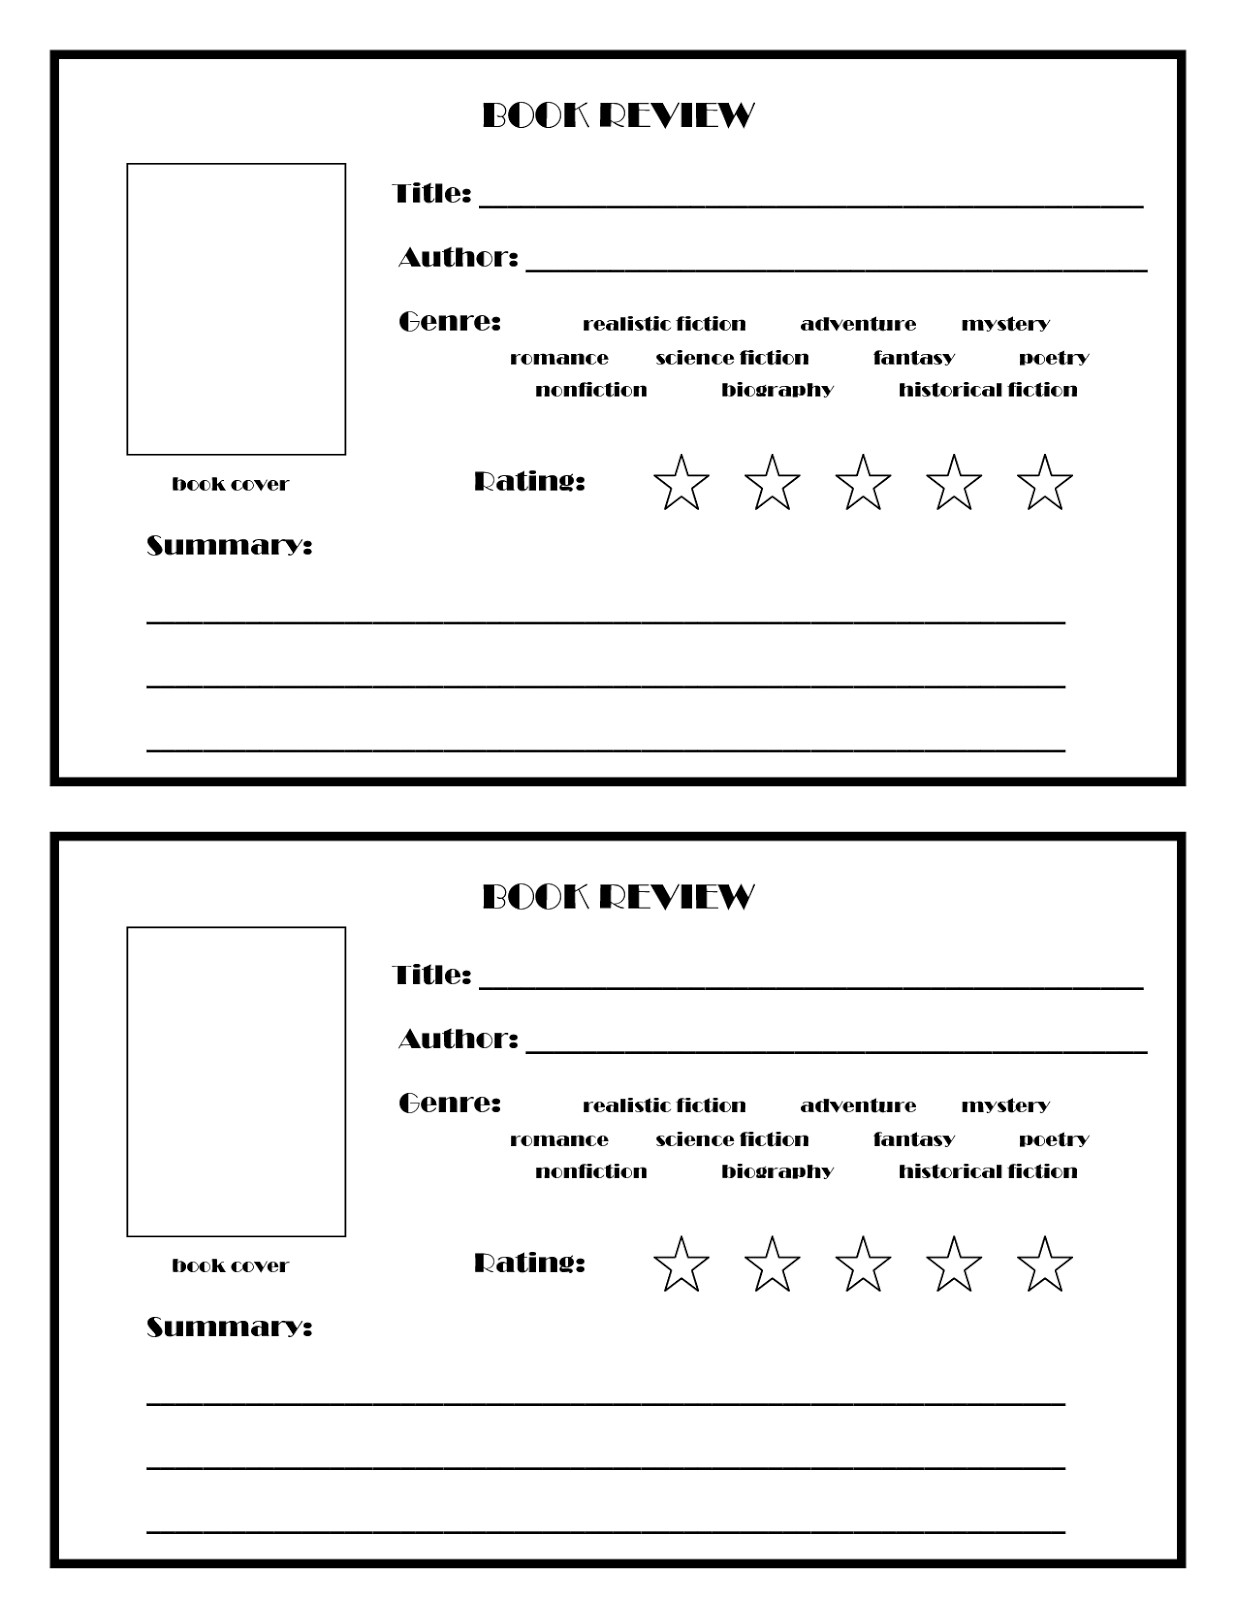 7-best-images-of-book-review-printable-template-book-review-template